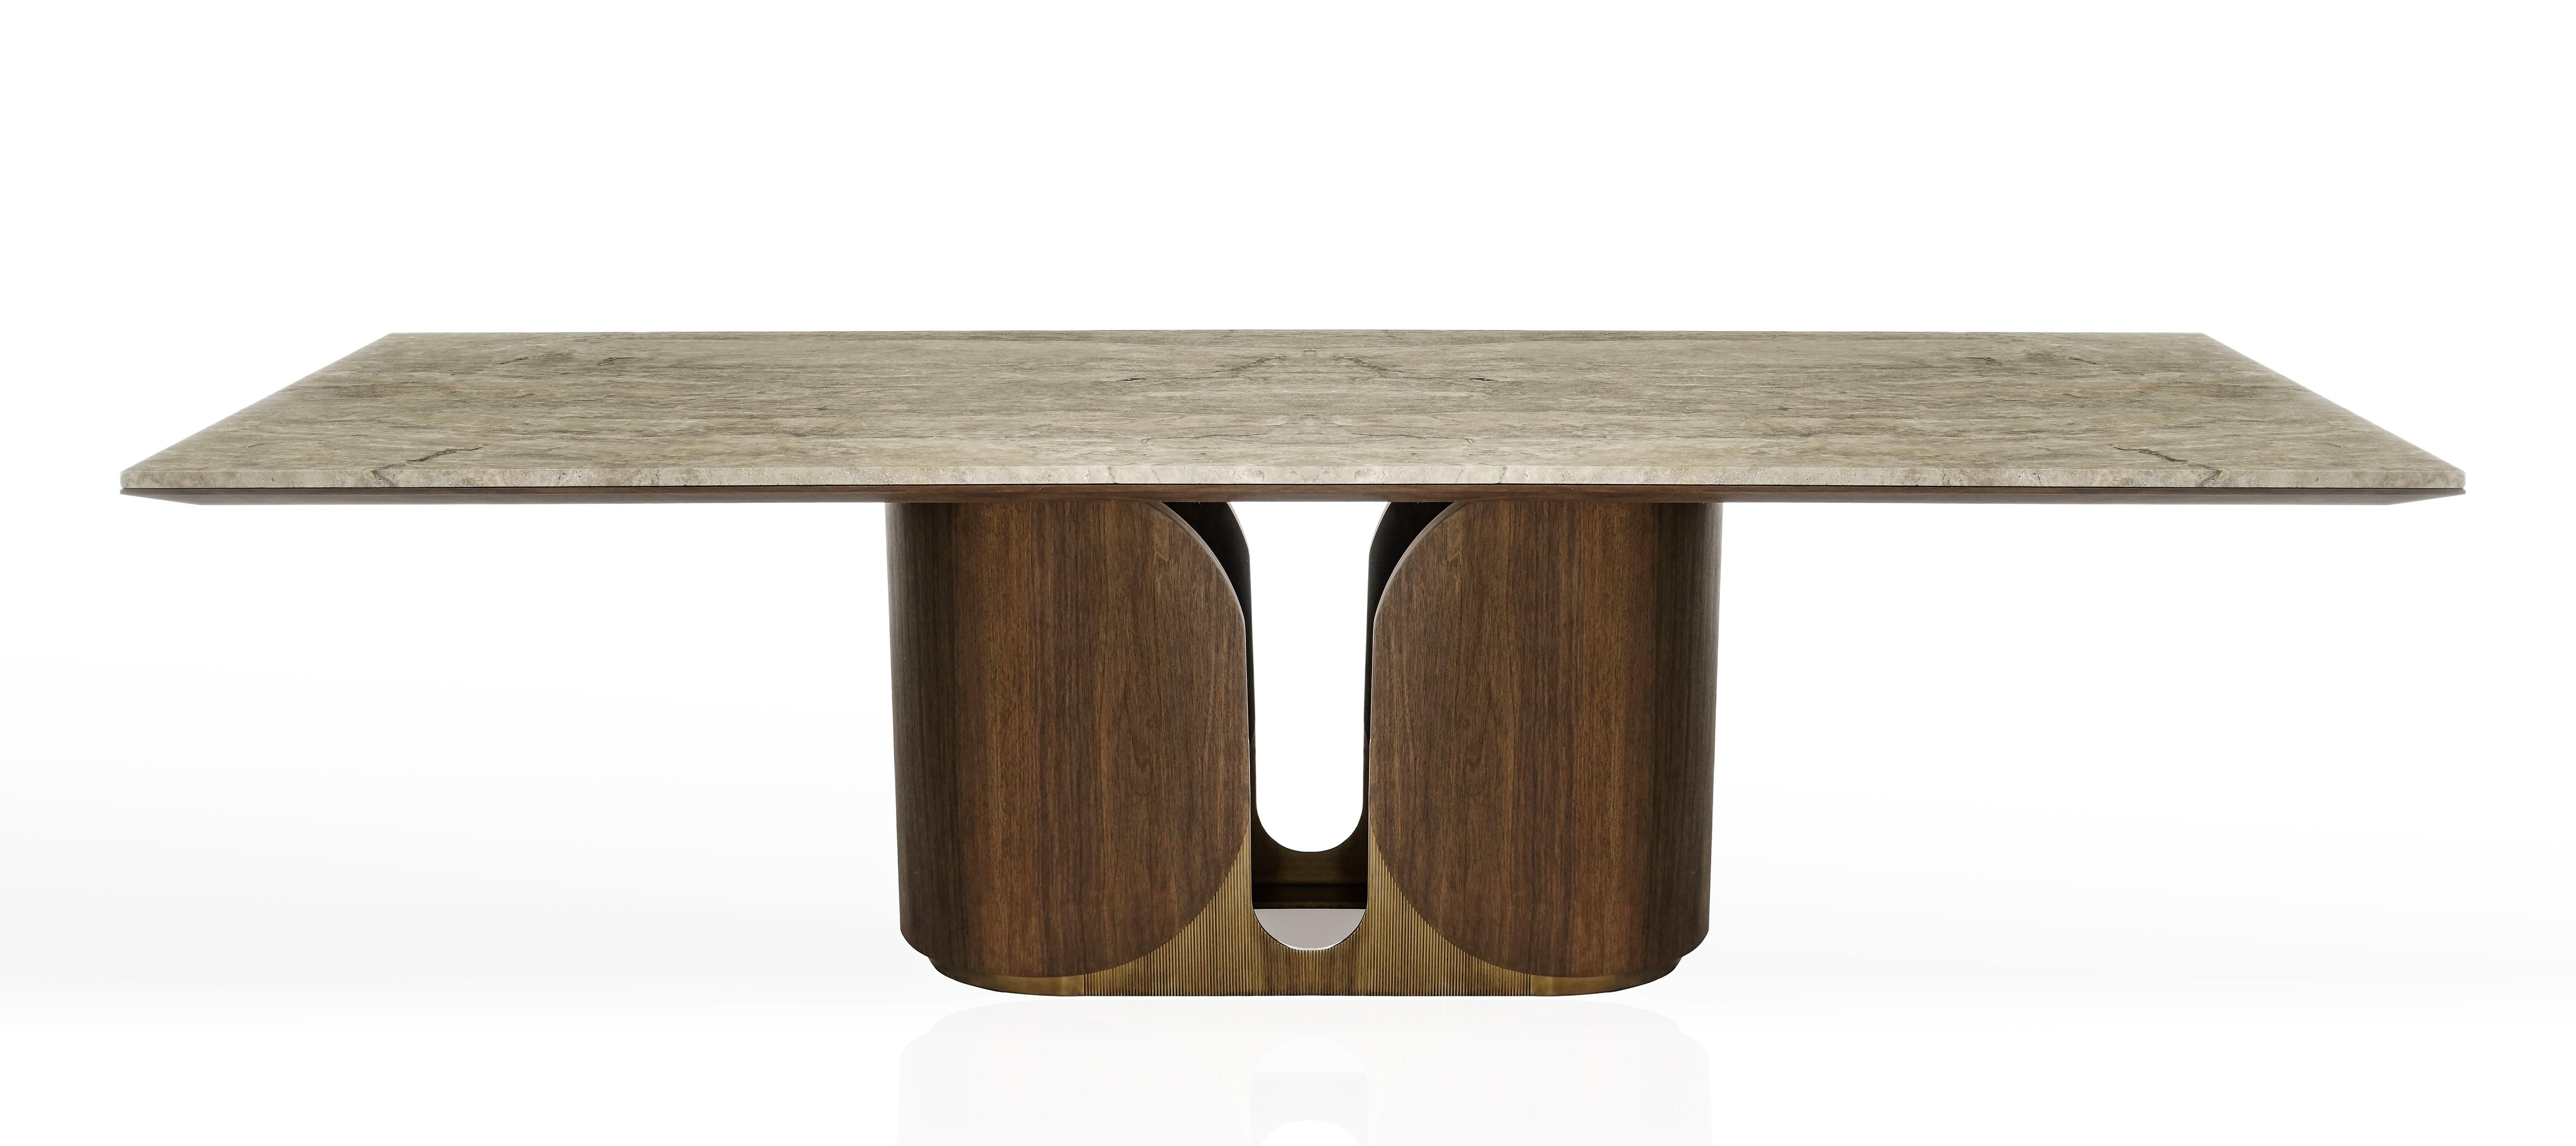 Horus Table Contemporary Dining Table In Aged Brass Base And